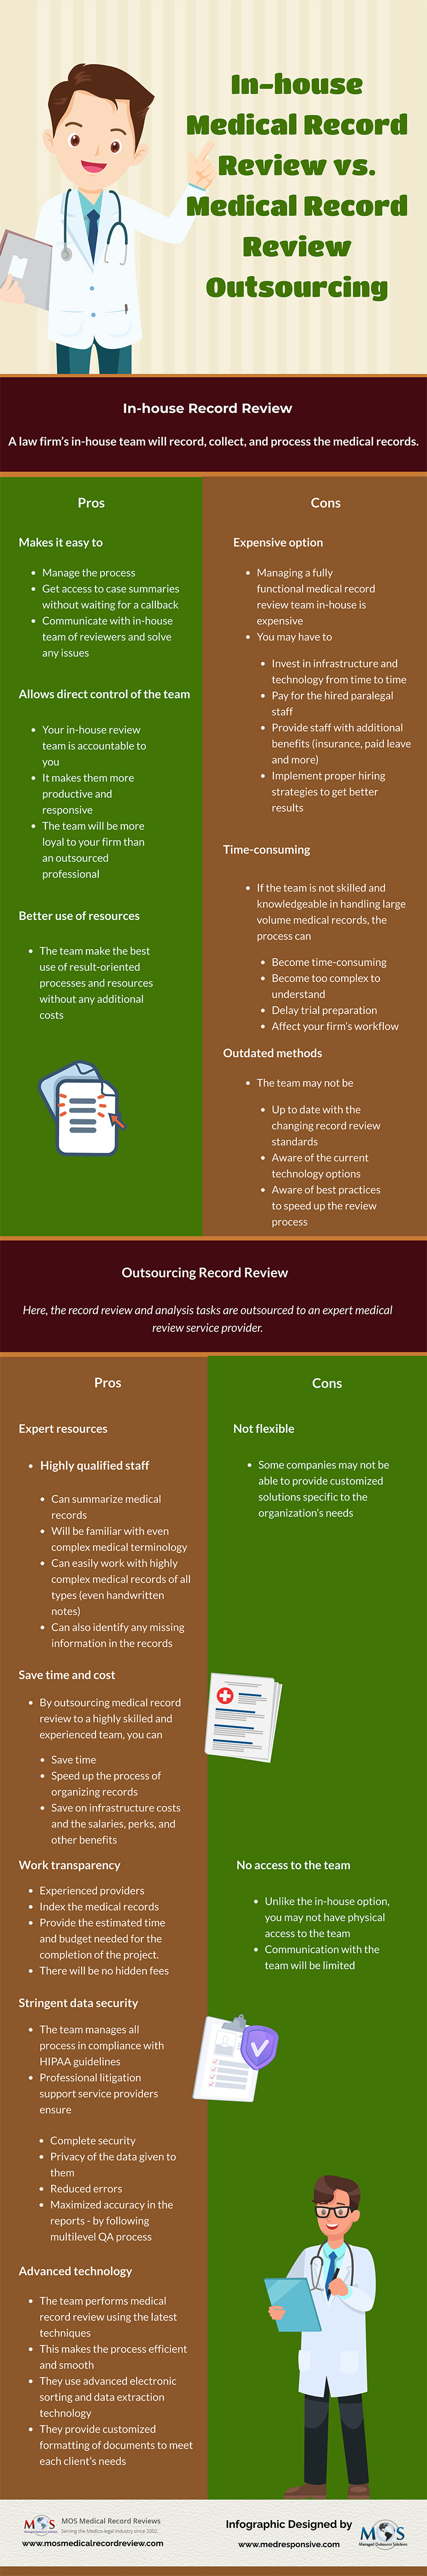 Medical Record Review vs Medical Record Review Outsourcing